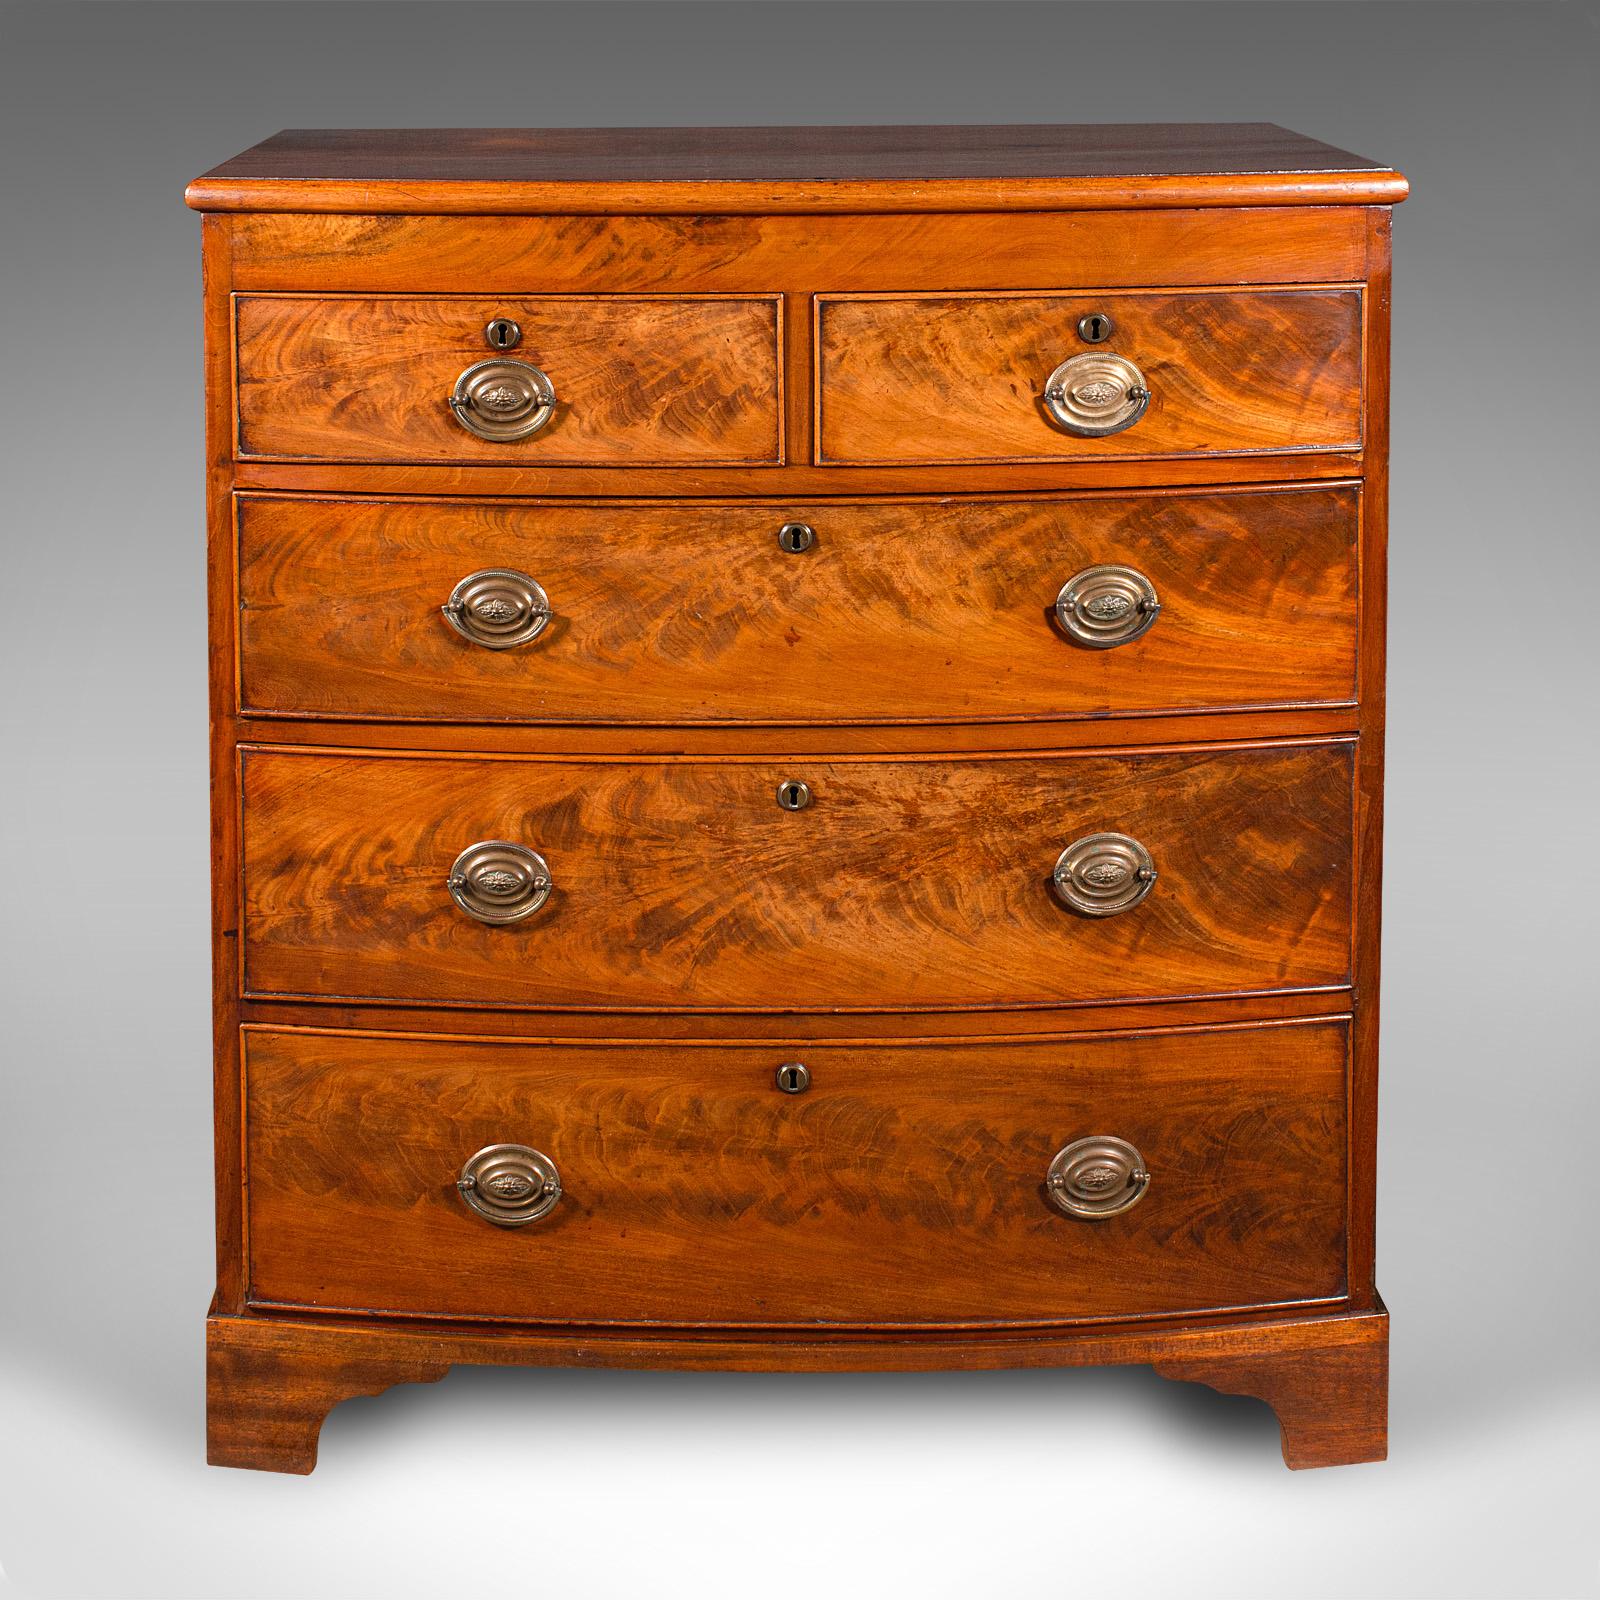 This is an antique bow front chest of drawers. An English, flame mahogany tallboy, dating to the Georgian period, circa 1800.

Graceful form and proportion to this exquisite Georgian piece
Displays a desirable aged patina and in very good